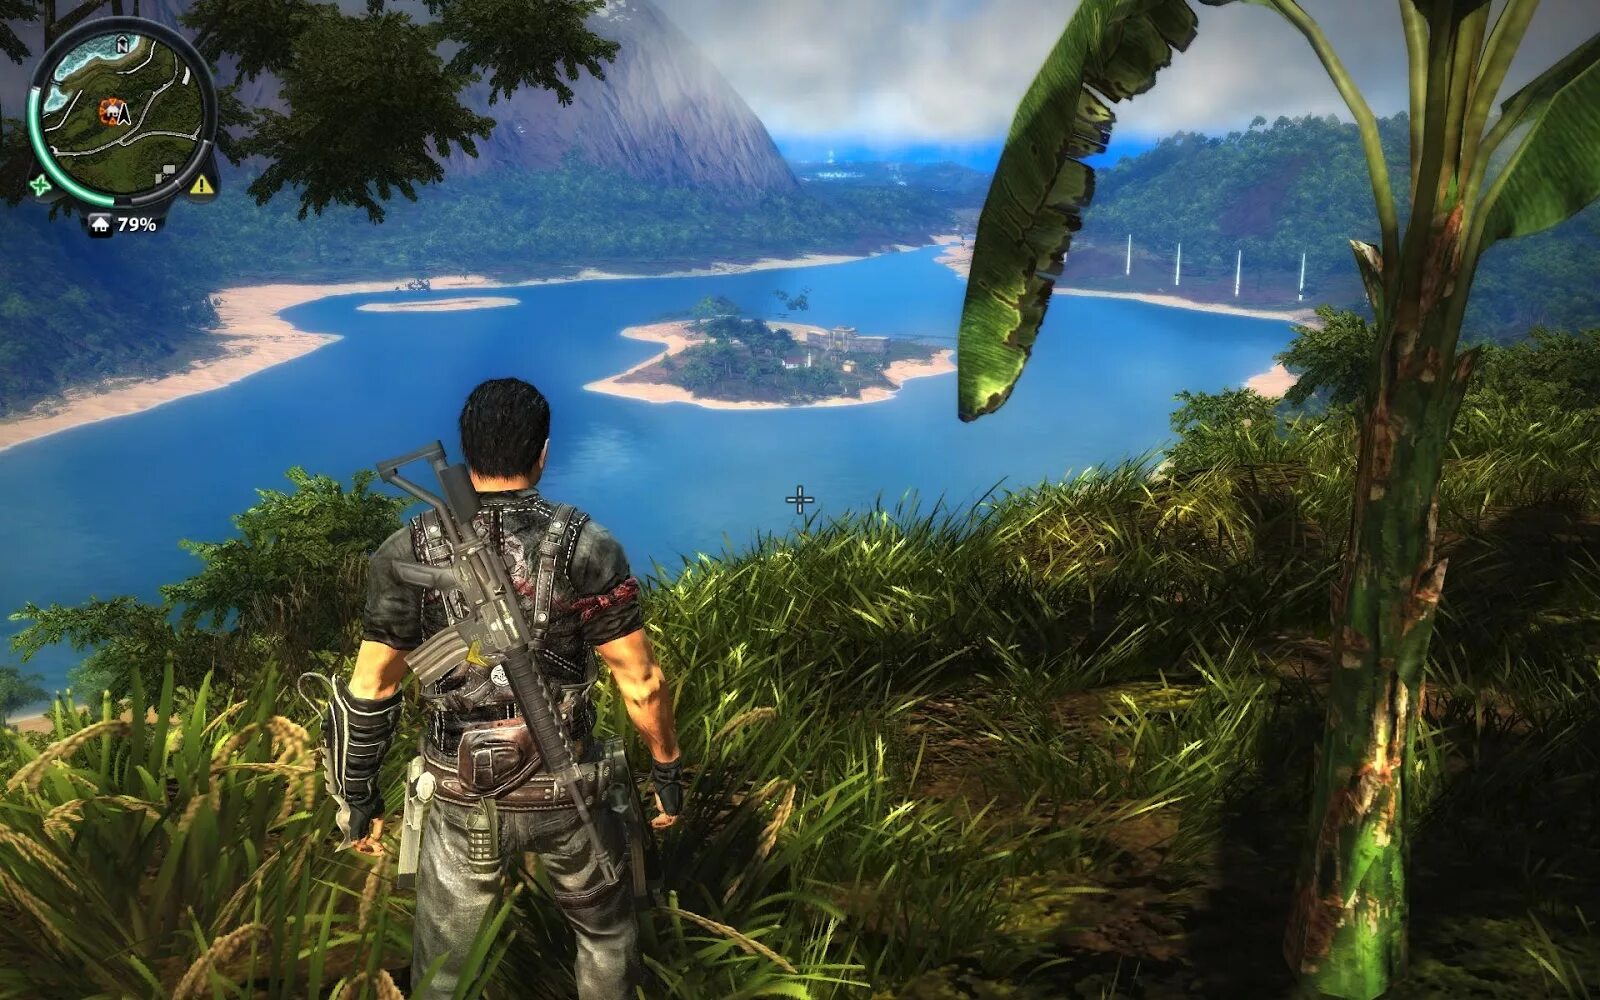 Игра just cause 2. Just cause игра 1. Just cause 2010. Just cause 2 босс.